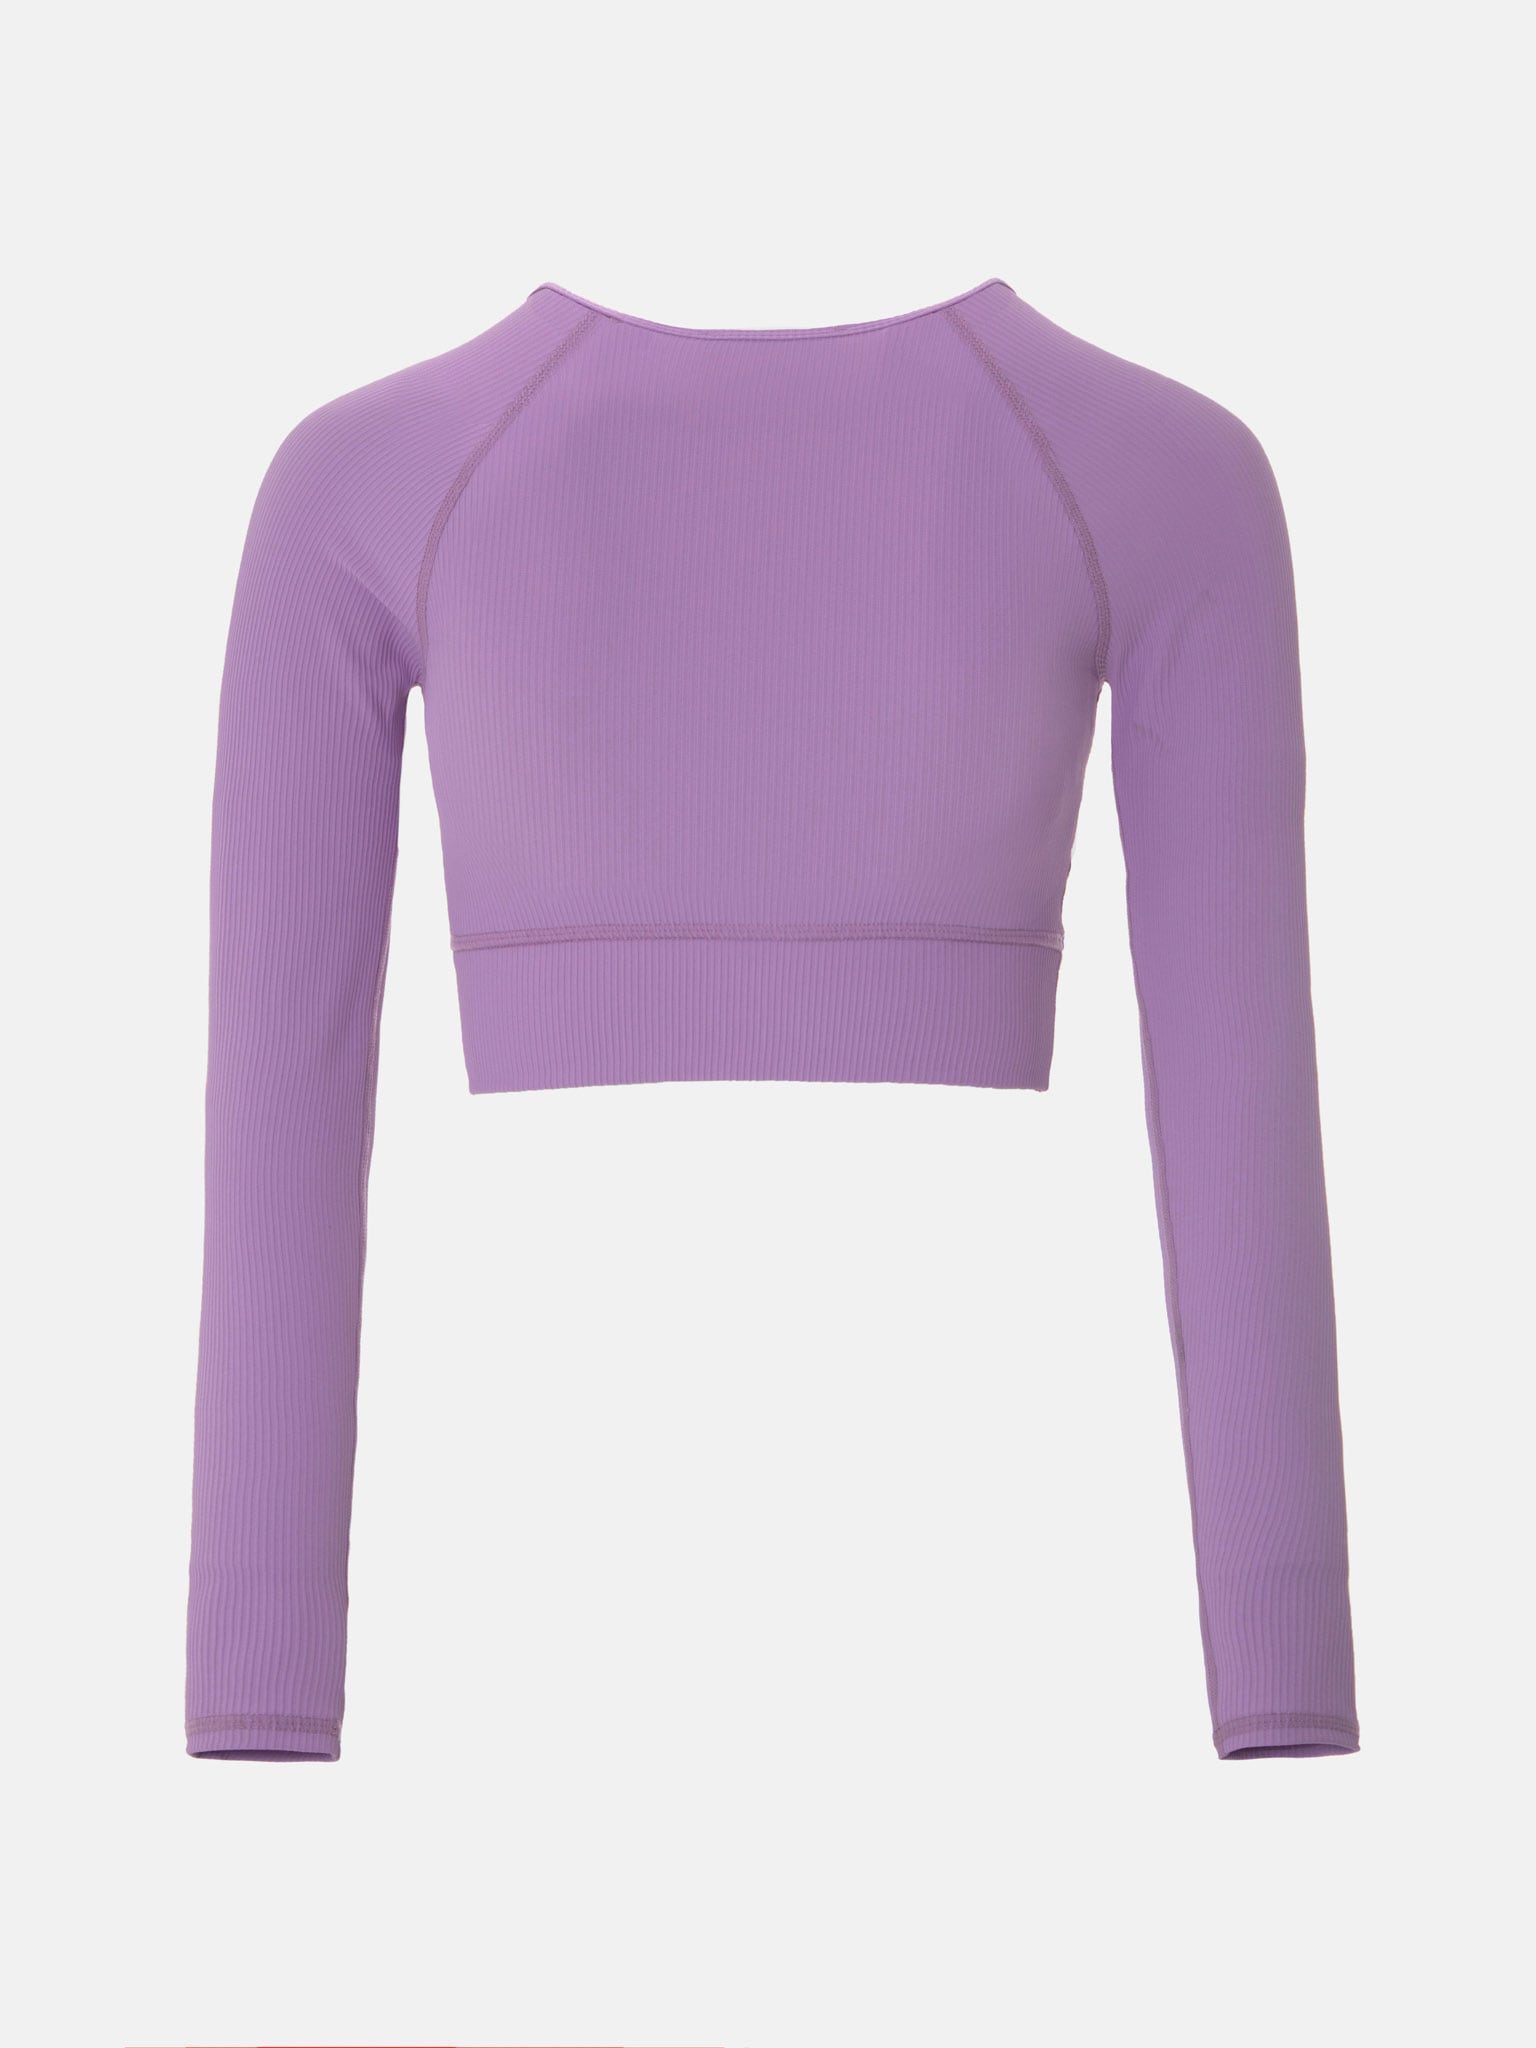 Ribbed stretch crop top